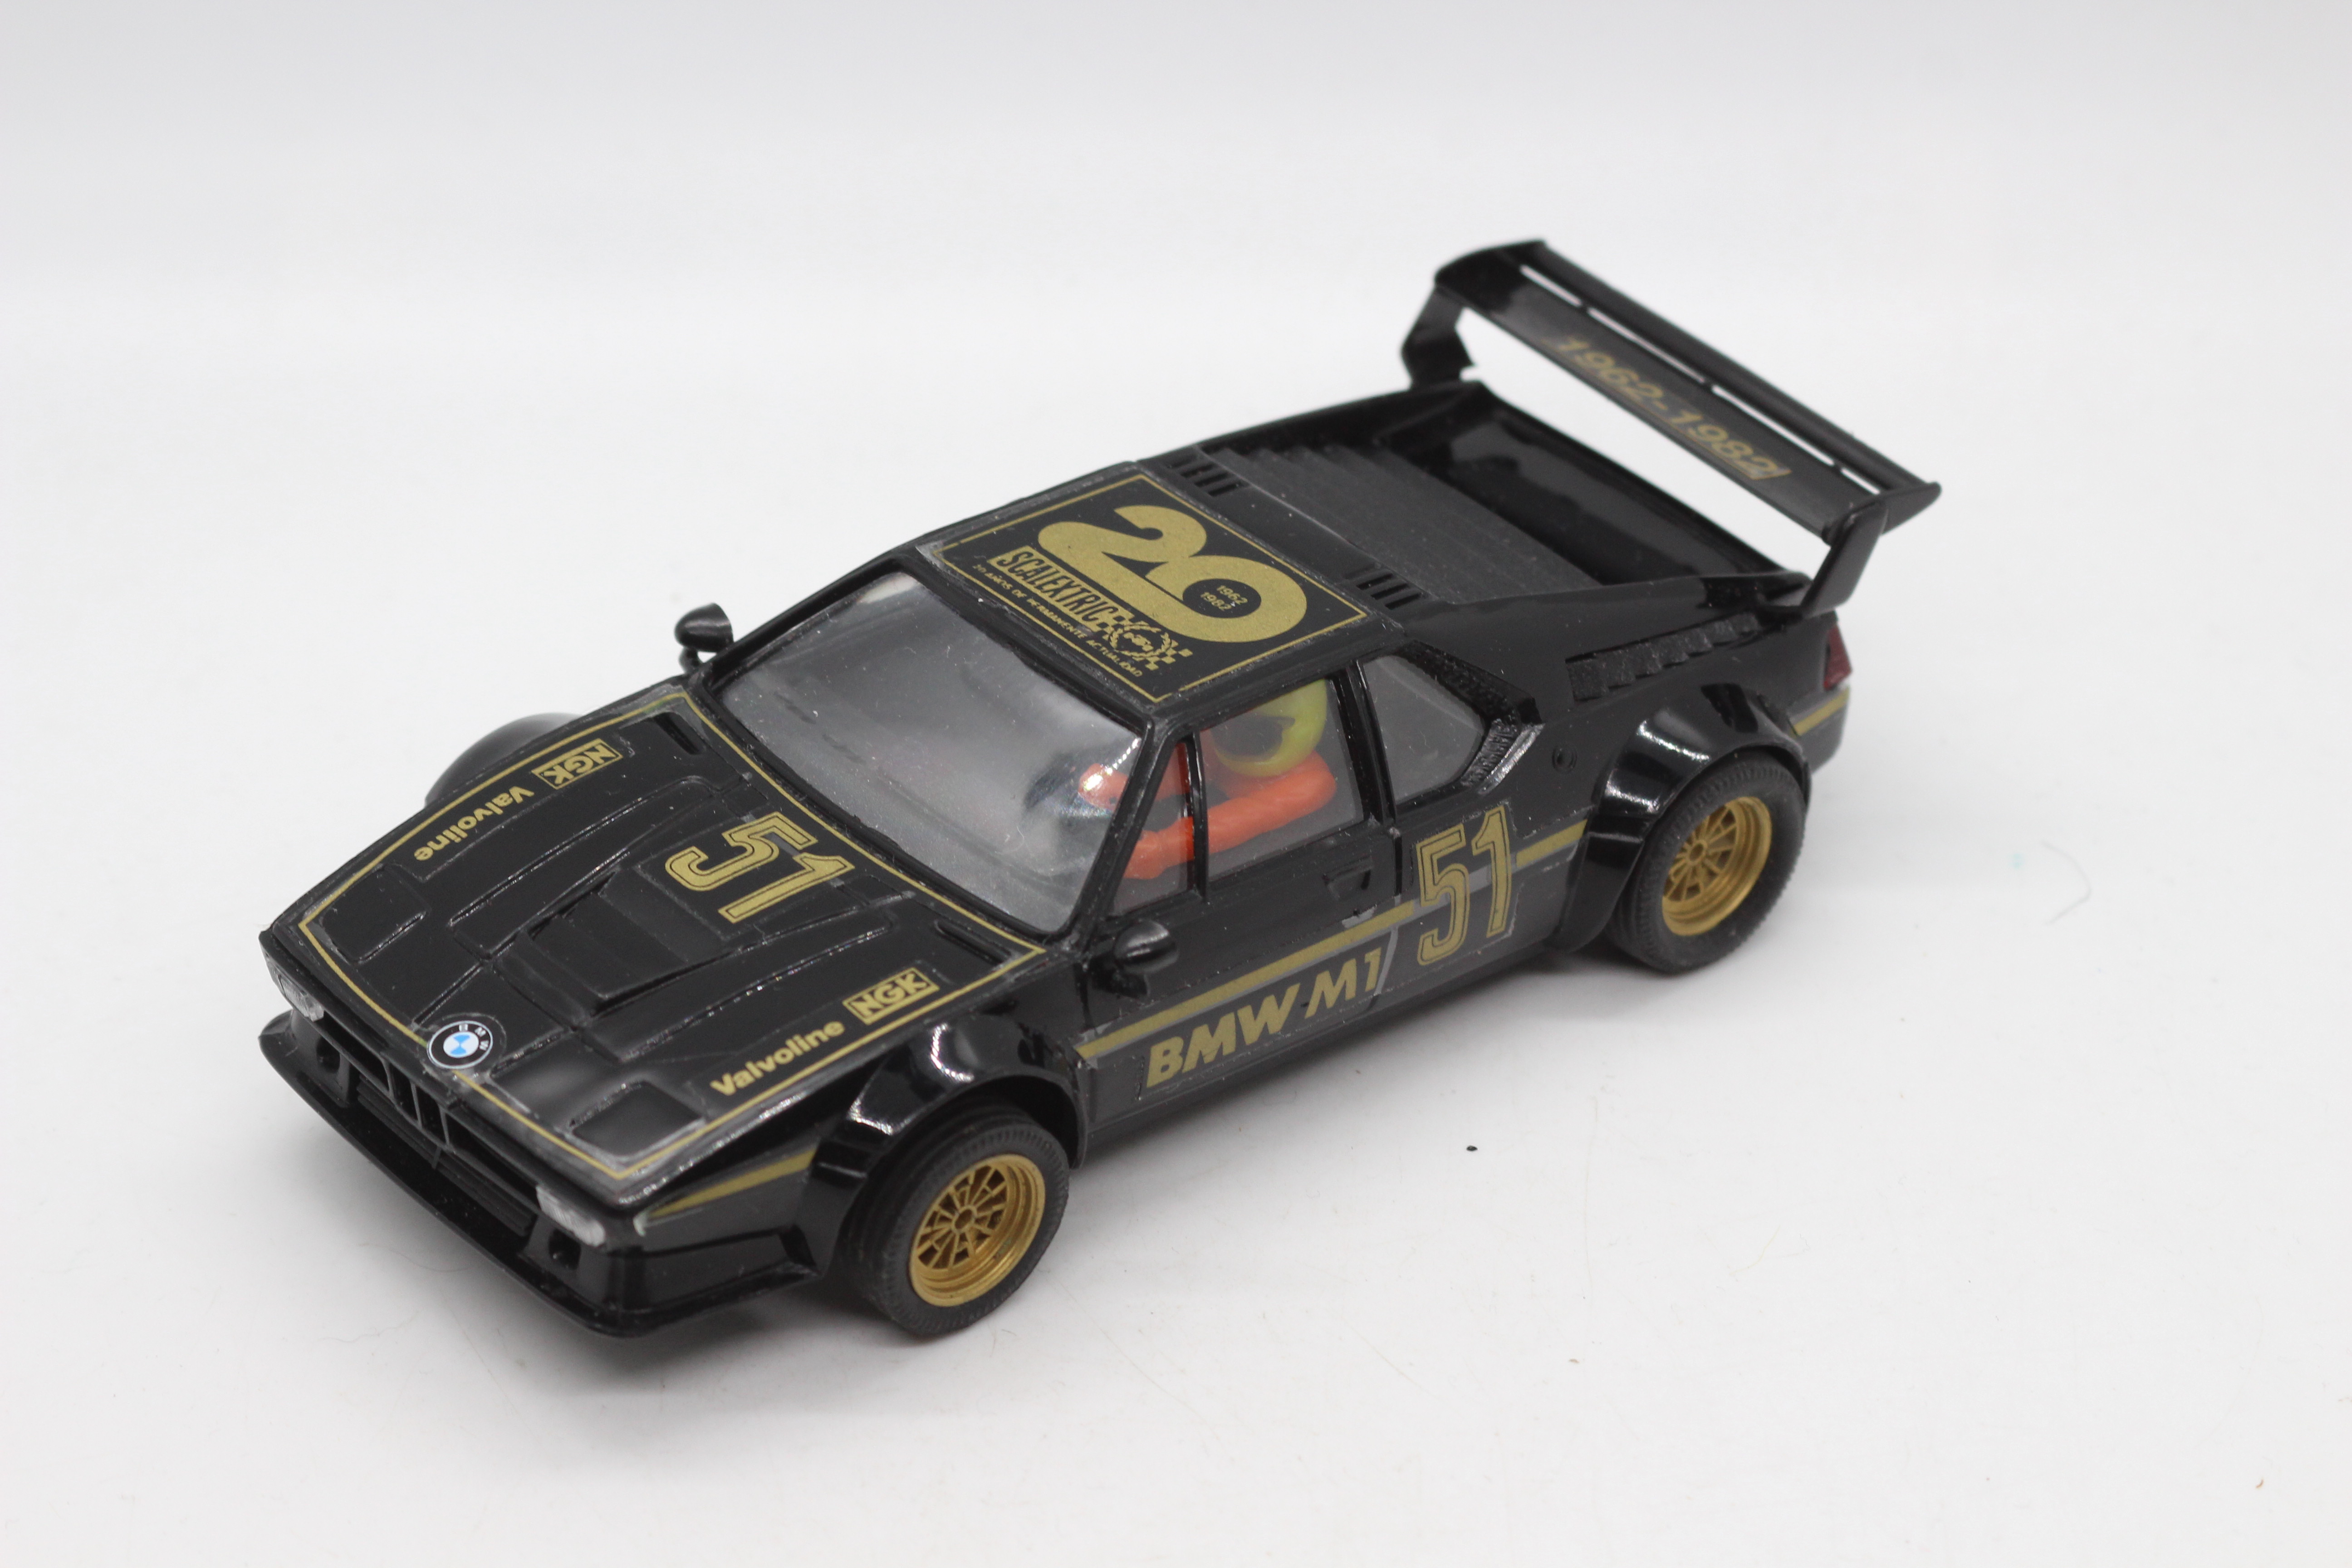 Scalextric Exin (Spain) - A boxed Limited Edition Scalextric (Exin) #4064 BMW M1 20th Anniversary - Image 2 of 9